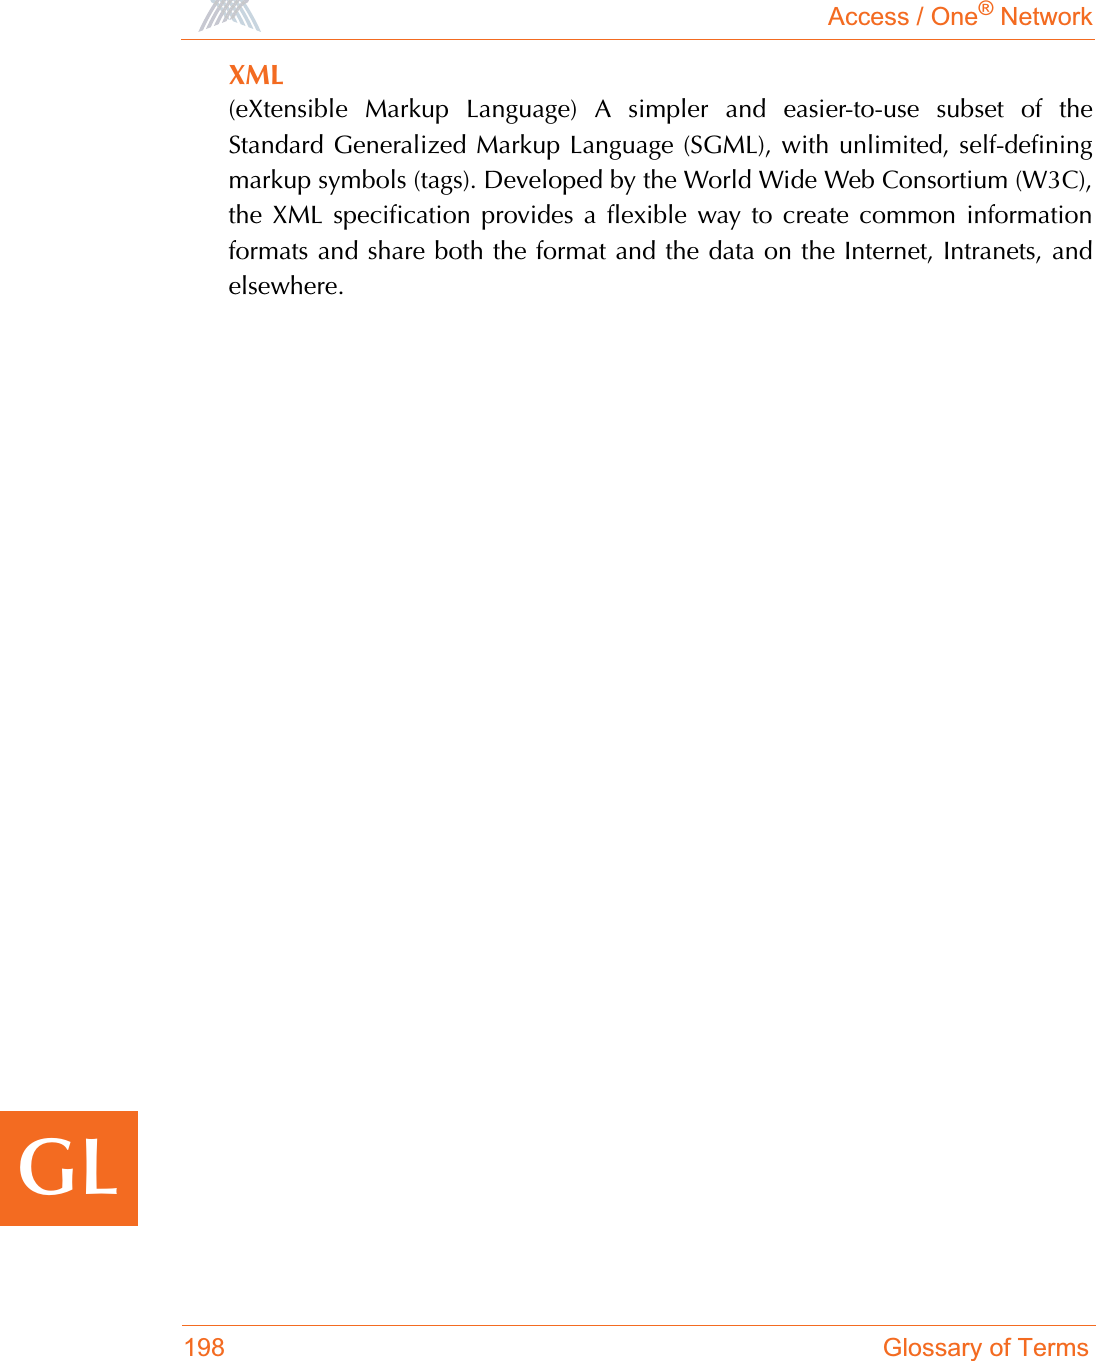 Access / One® Network198 Glossary of TermsGLXML(eXtensible Markup Language) A simpler and easier-to-use subset of theStandard Generalized Markup Language (SGML), with unlimited, self-definingmarkup symbols (tags). Developed by the World Wide Web Consortium (W3C),the XML specification provides a flexible way to create common informationformats and share both the format and the data on the Internet, Intranets, andelsewhere.